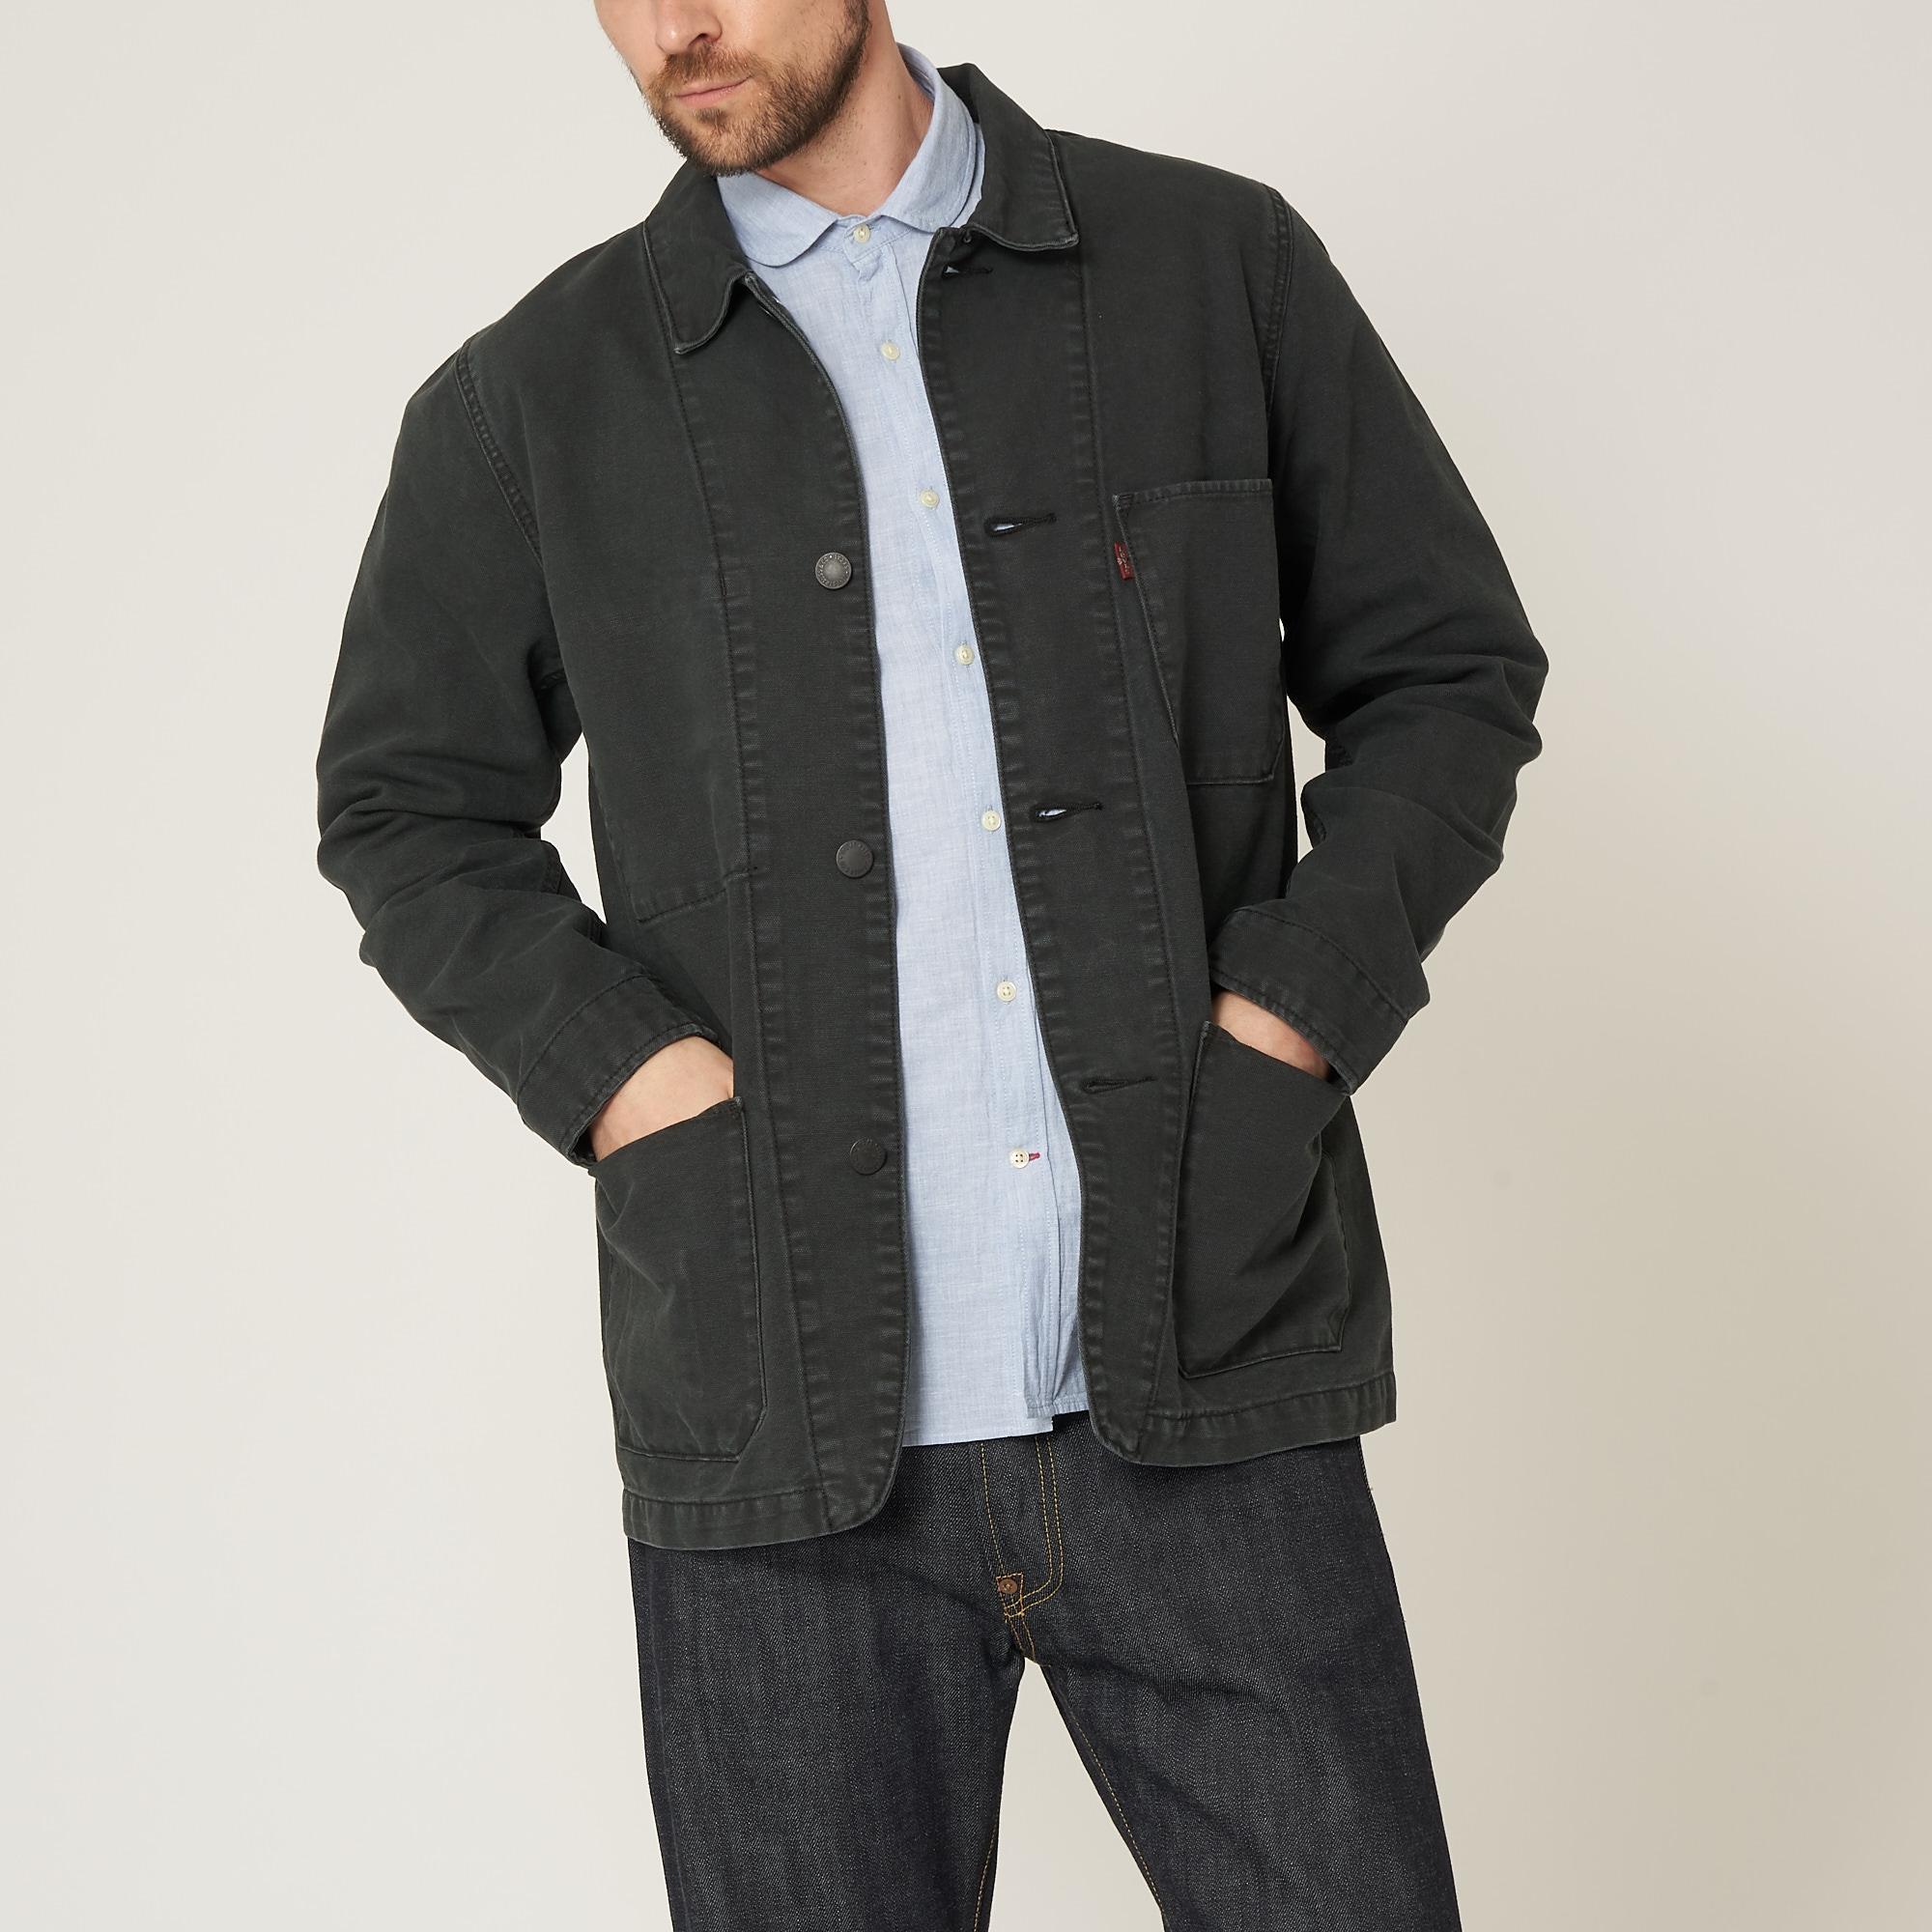 Levi's Cotton Caviar Engineer's Coat in Blue for Men - Lyst